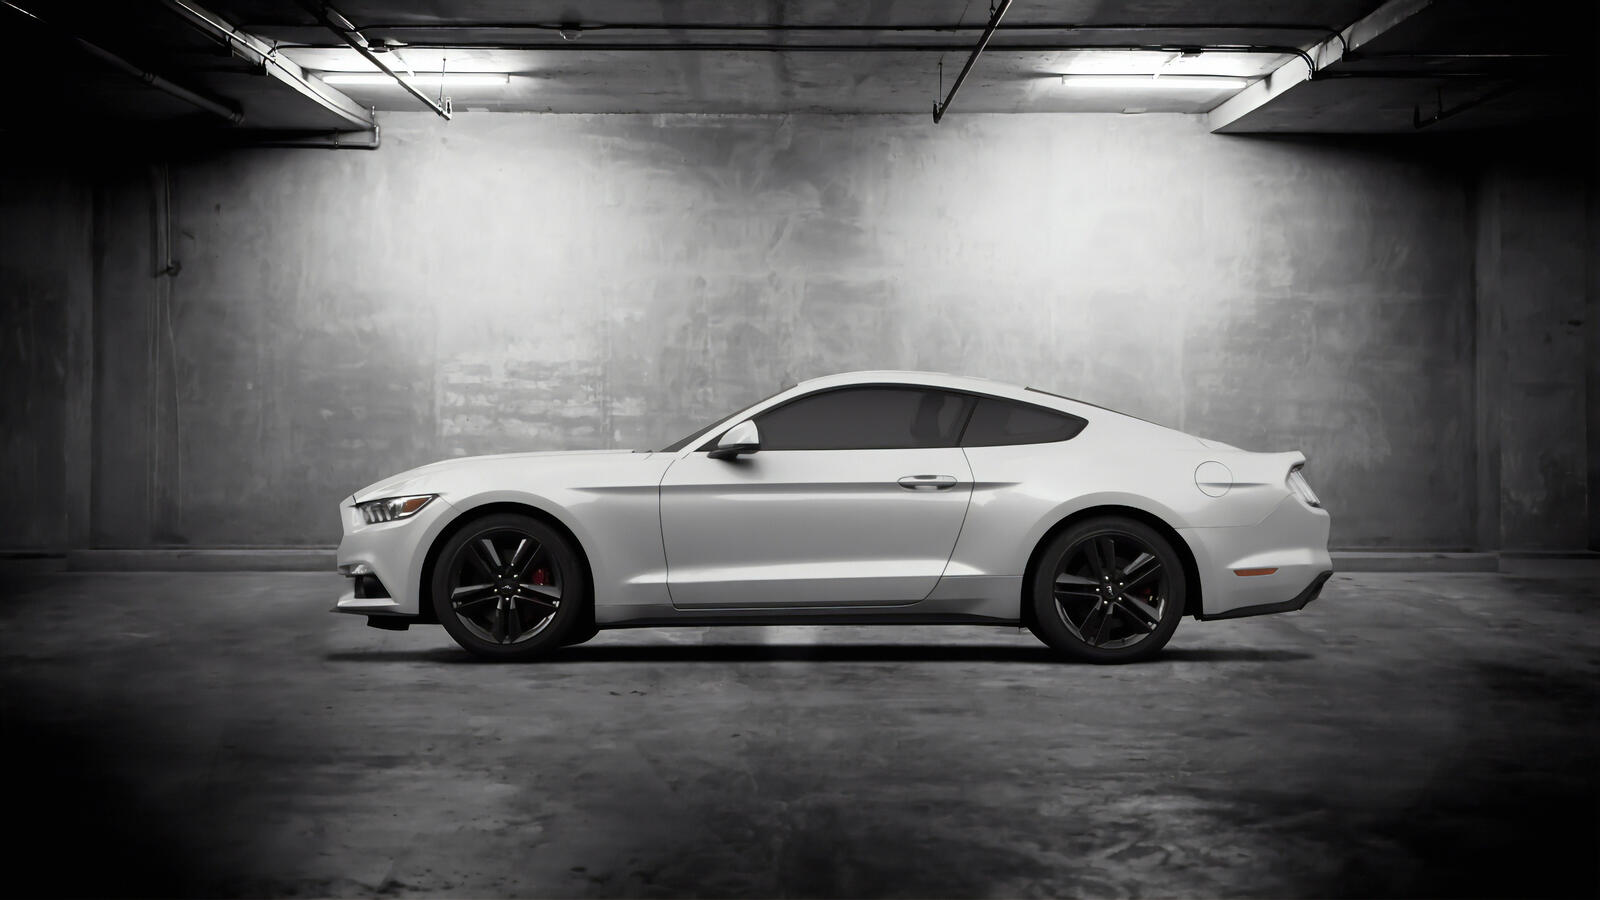 Free photo White 2019 Ford Mustang in underground parking lot